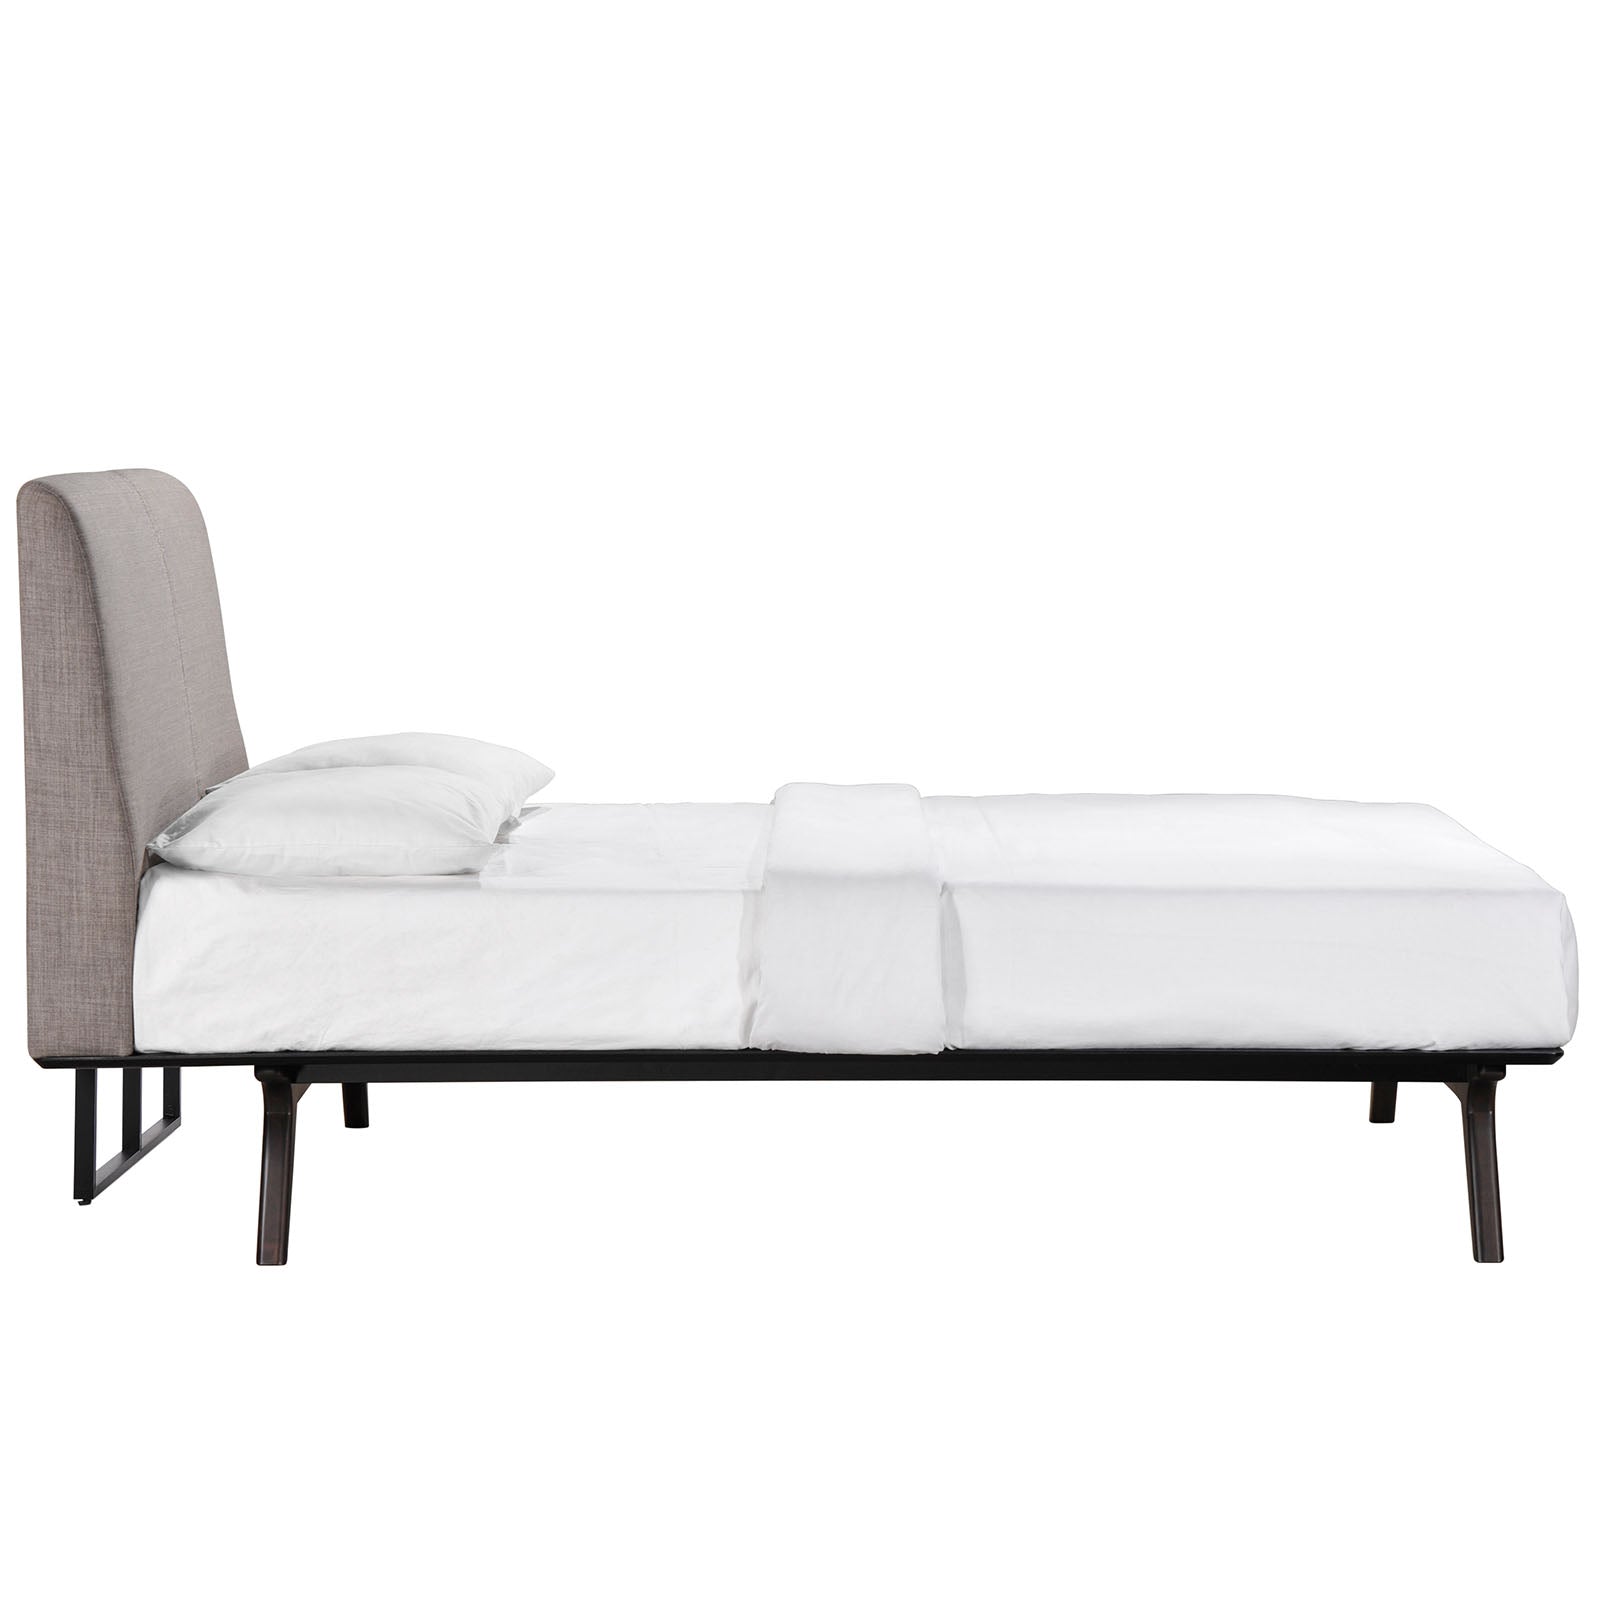 Modway Beds - Tracy Full Bed Cappuccino Gray